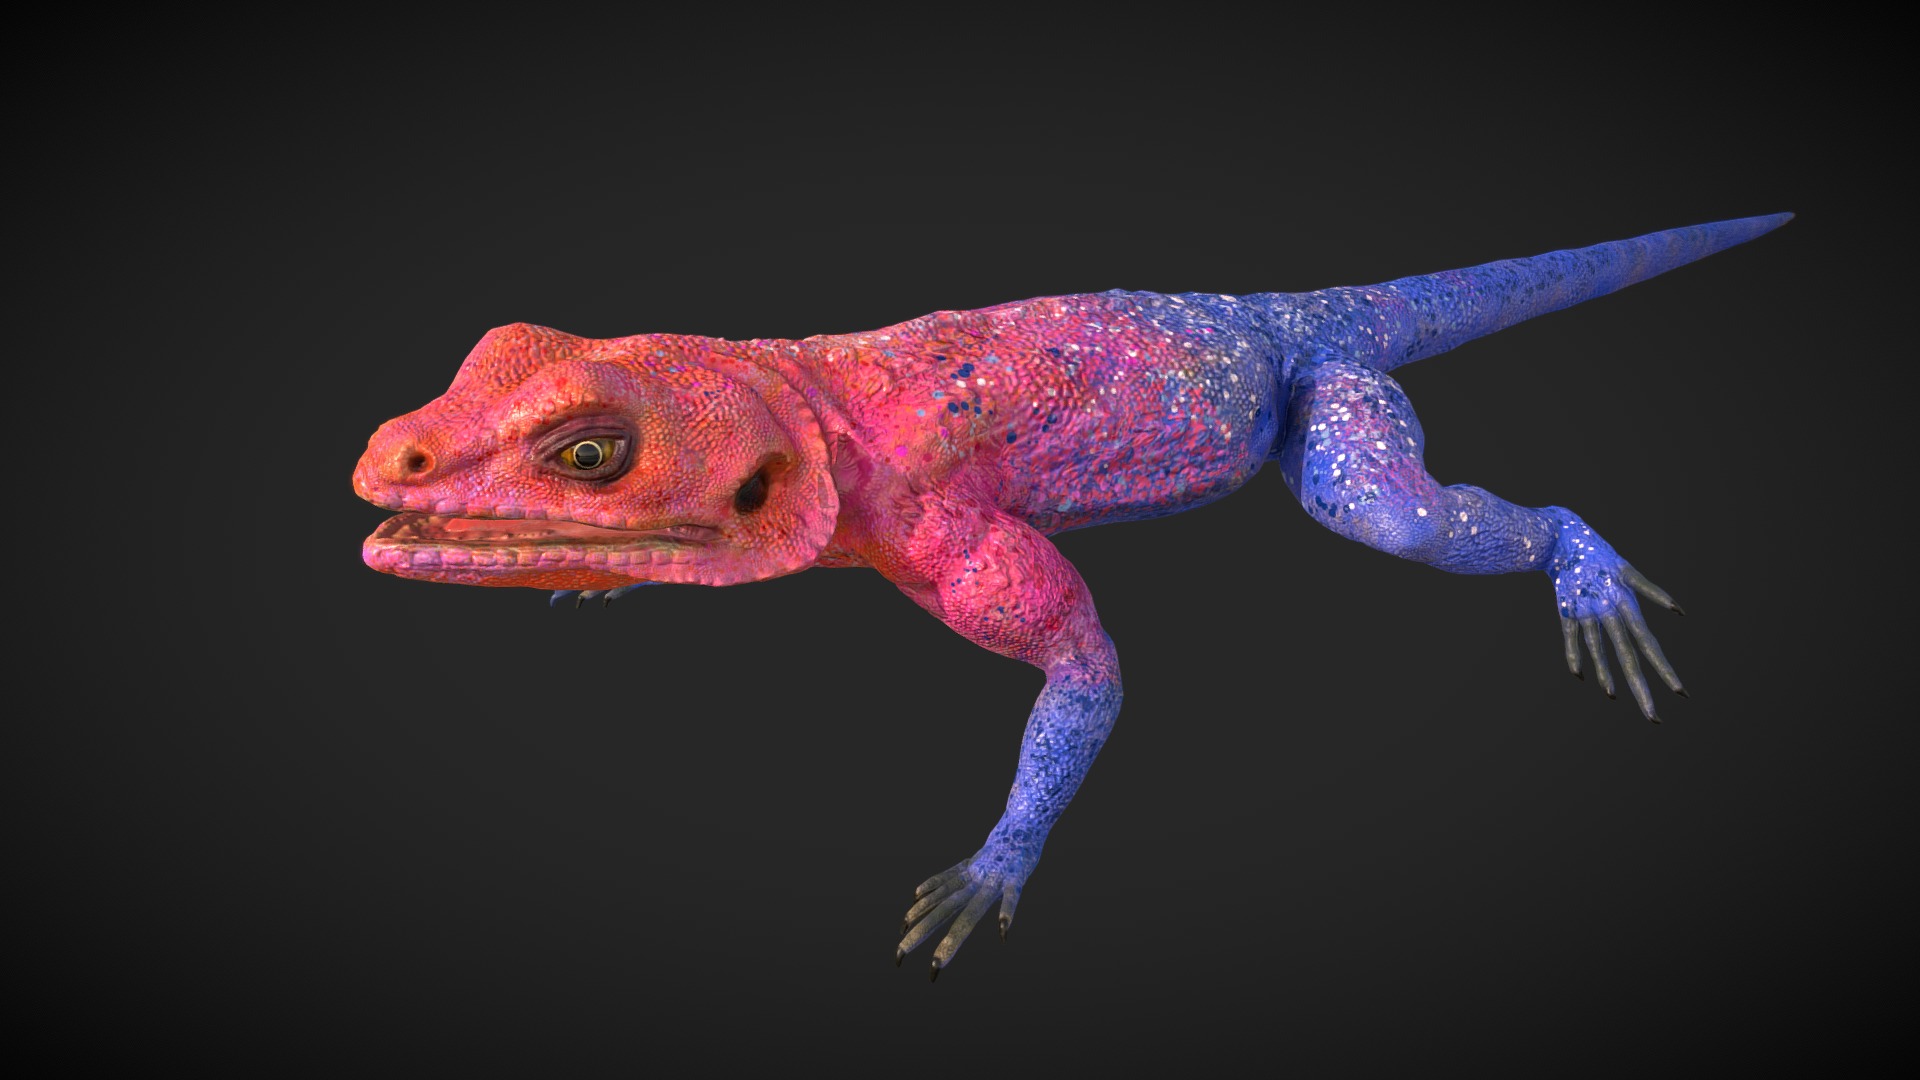 3D model Low poly detailed agama mwanzae model - This is a 3D model of the Low poly detailed agama mwanzae model. The 3D model is about a red and blue fish.